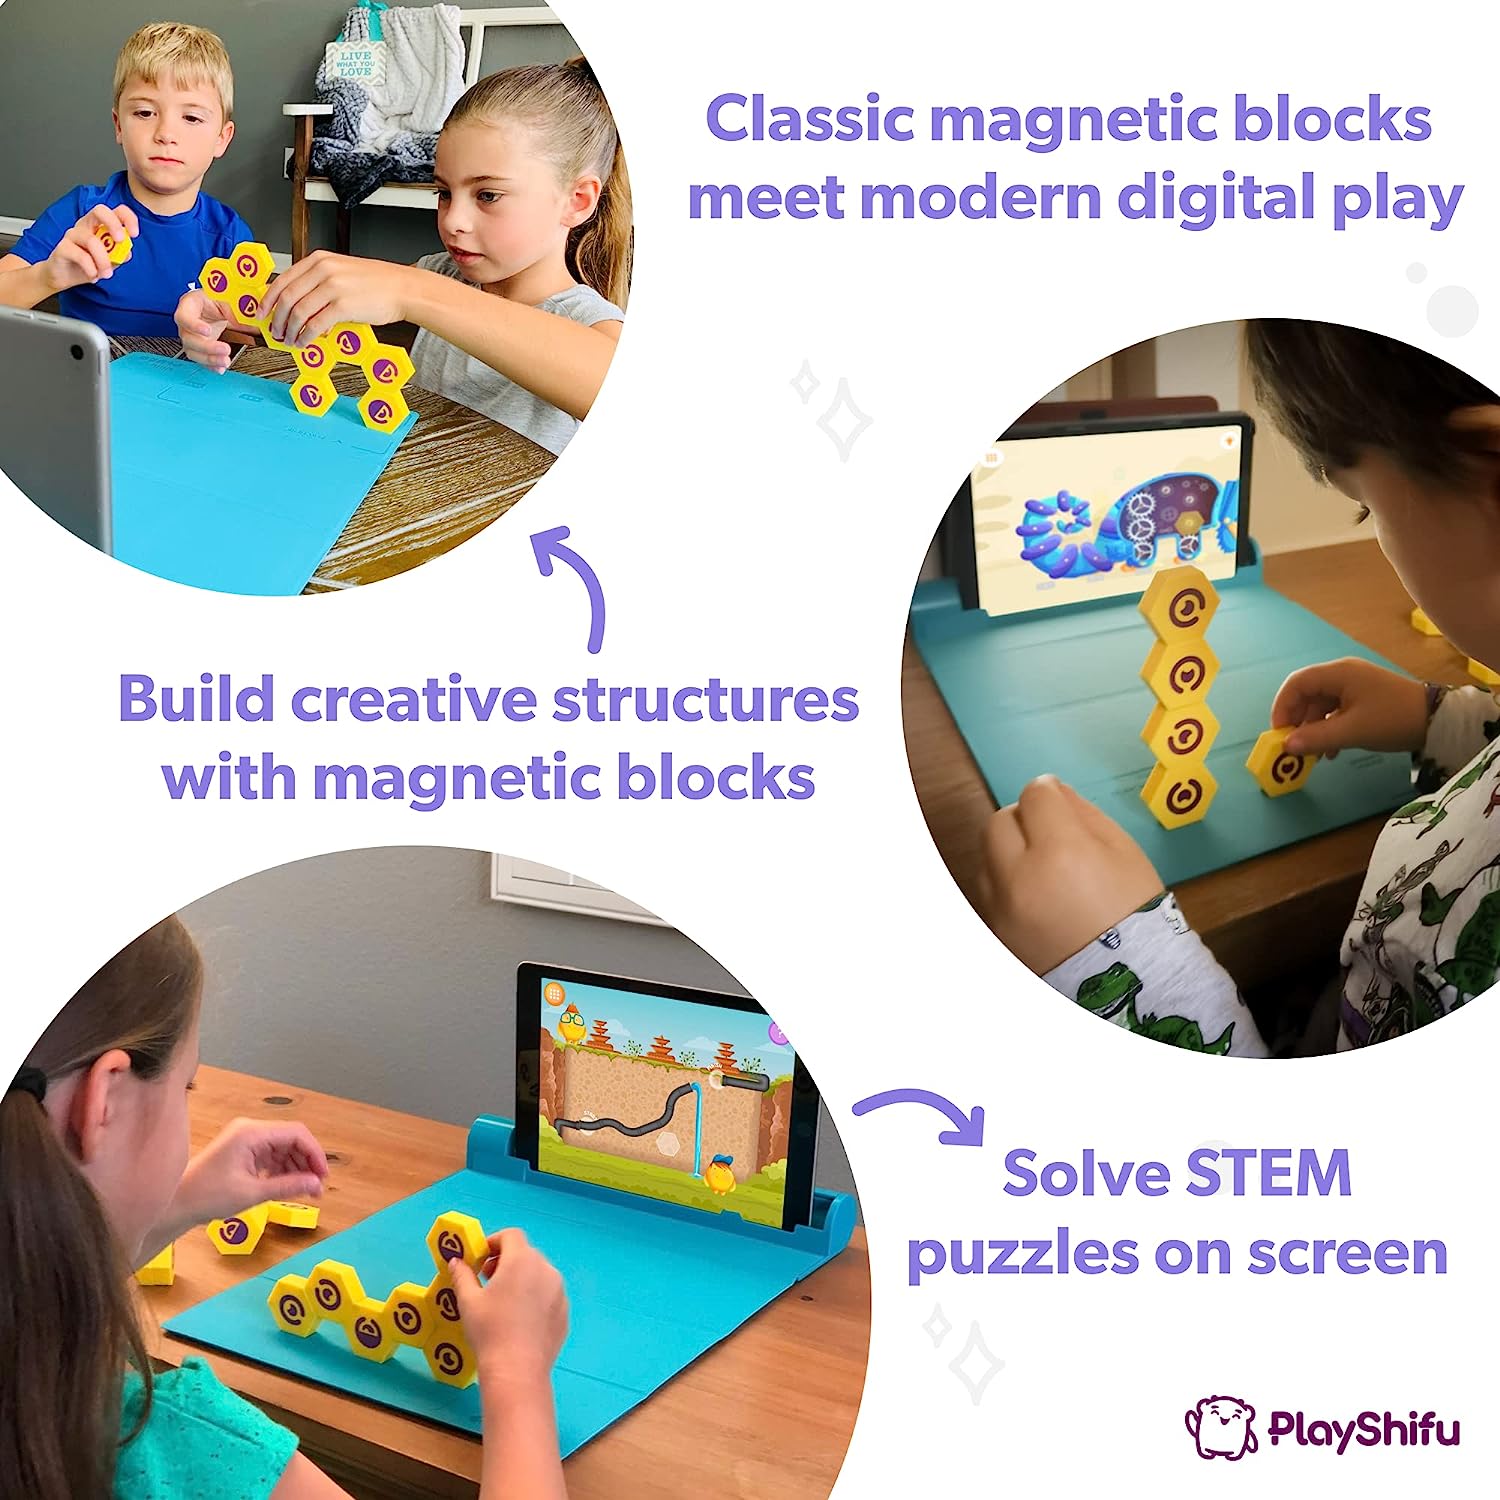 Play Interactive STEM Toys - Plugo Link (Kit + App) | Educational Toy for Kids 4-10 Years | Brain Games | Magnetic Building Blocks + 200 STEM Puzzles | Engineering Kit (Works with tabs/mobiles)